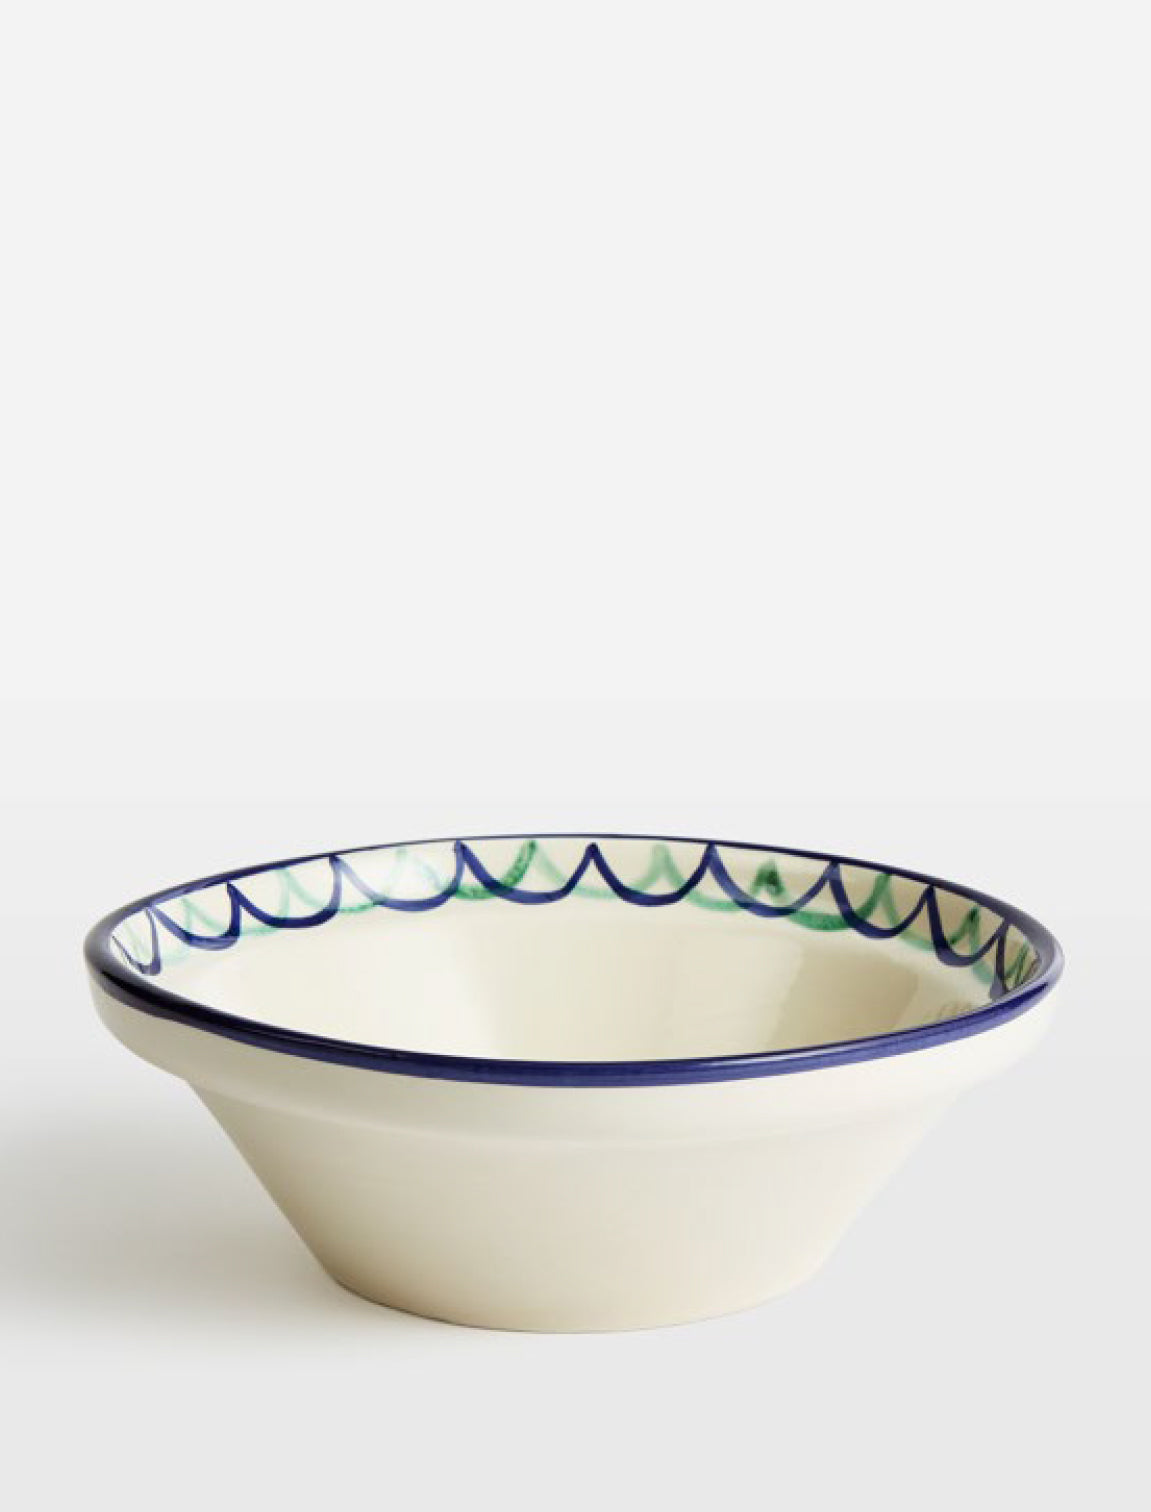 MEDIUM RIMMED BOWL - Part of our Soho Home Collection